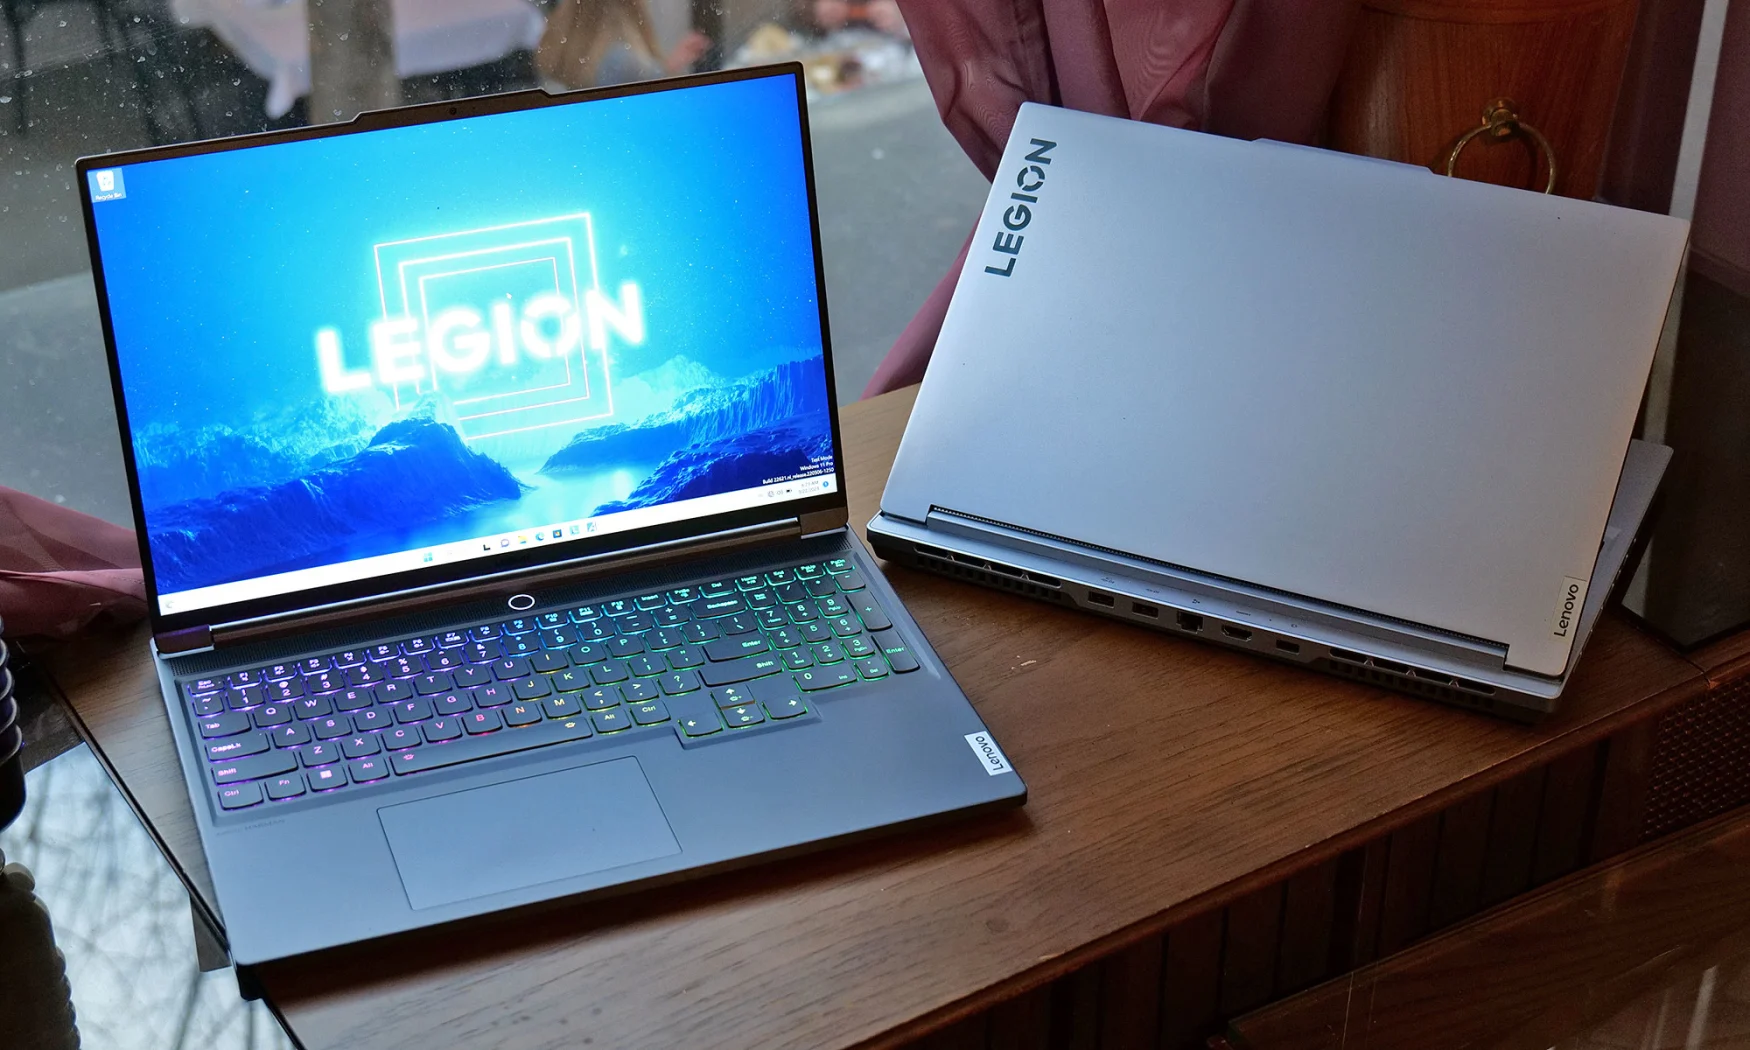 While similar in design to the more affordable LOQ line, the Legion Slim 5 and Slim offer slightly more powerful specs in a more premium aluminum chassis. 